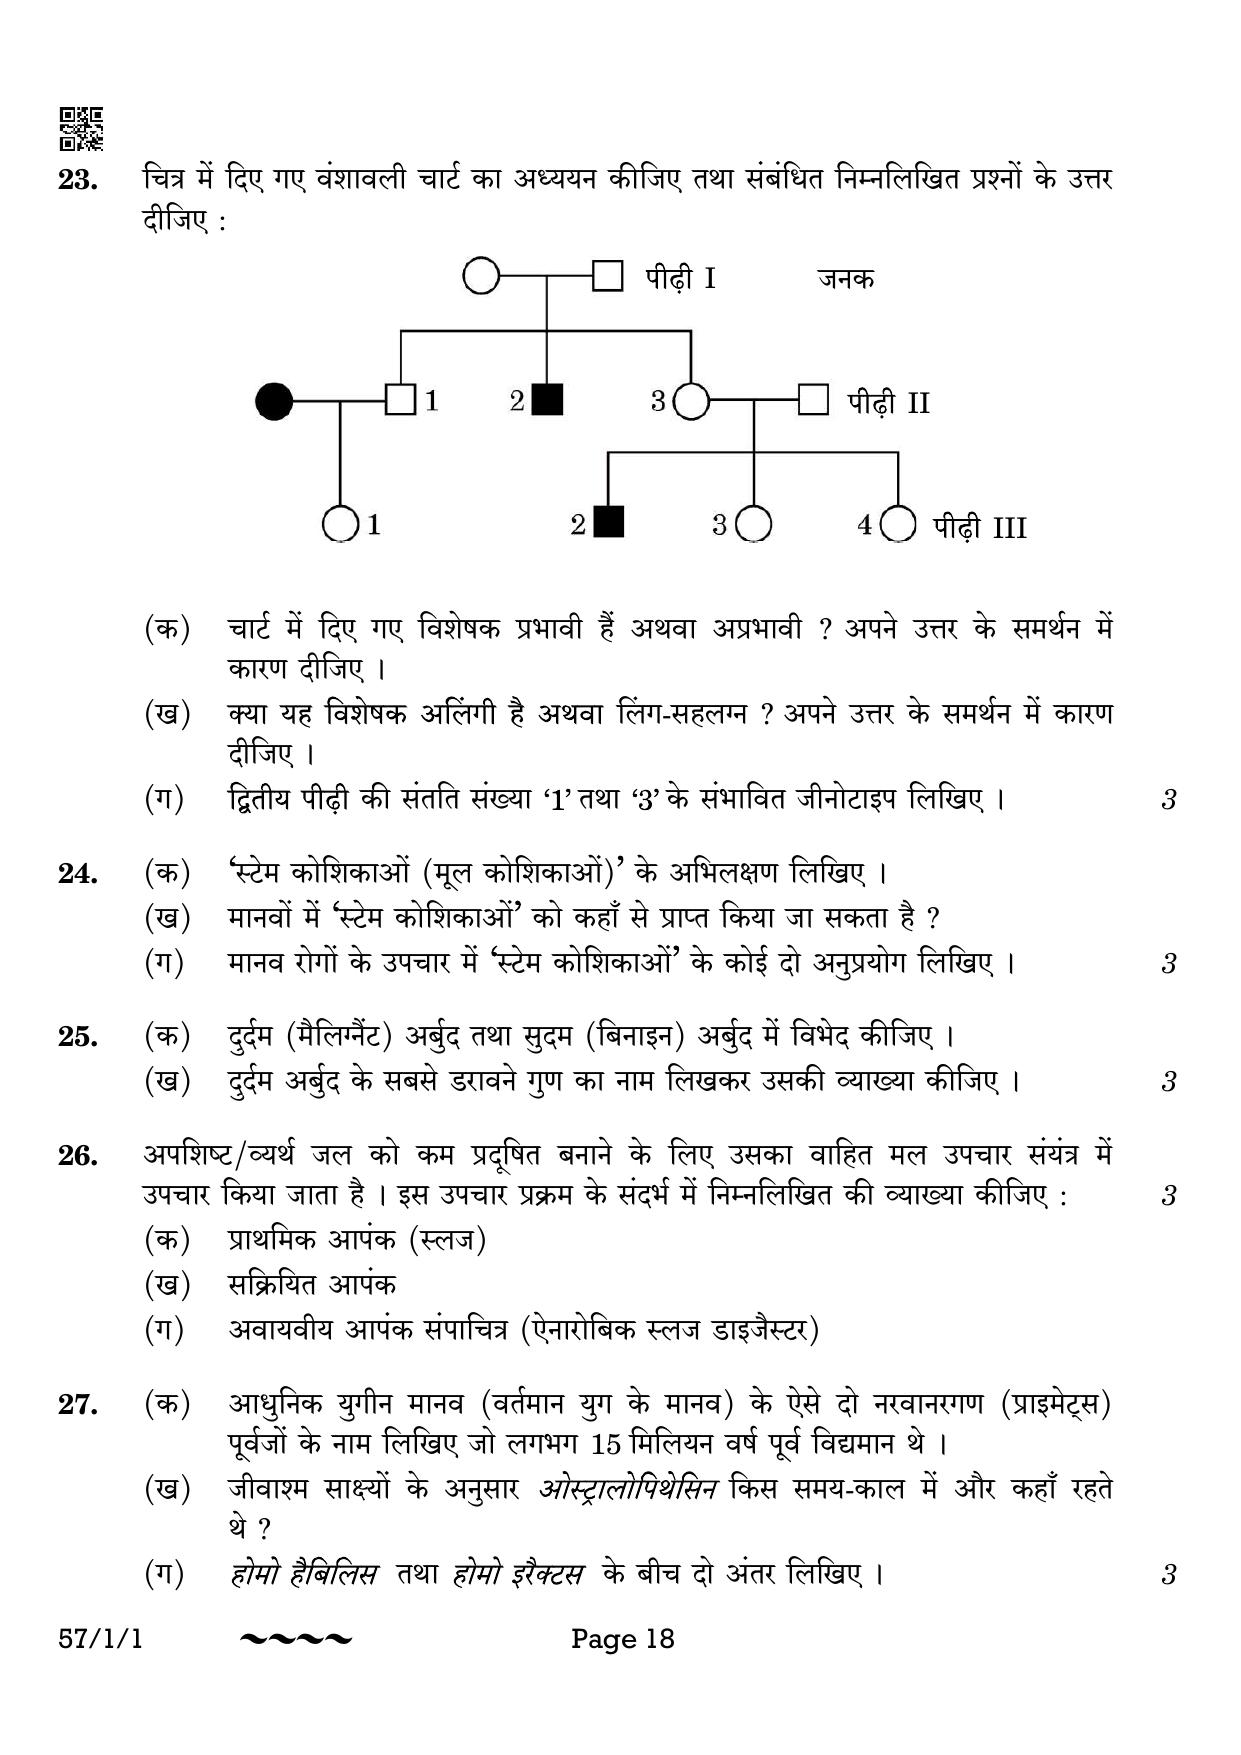 CBSE Class 12 57-1-1 Biology 2023 Question Paper - Page 18